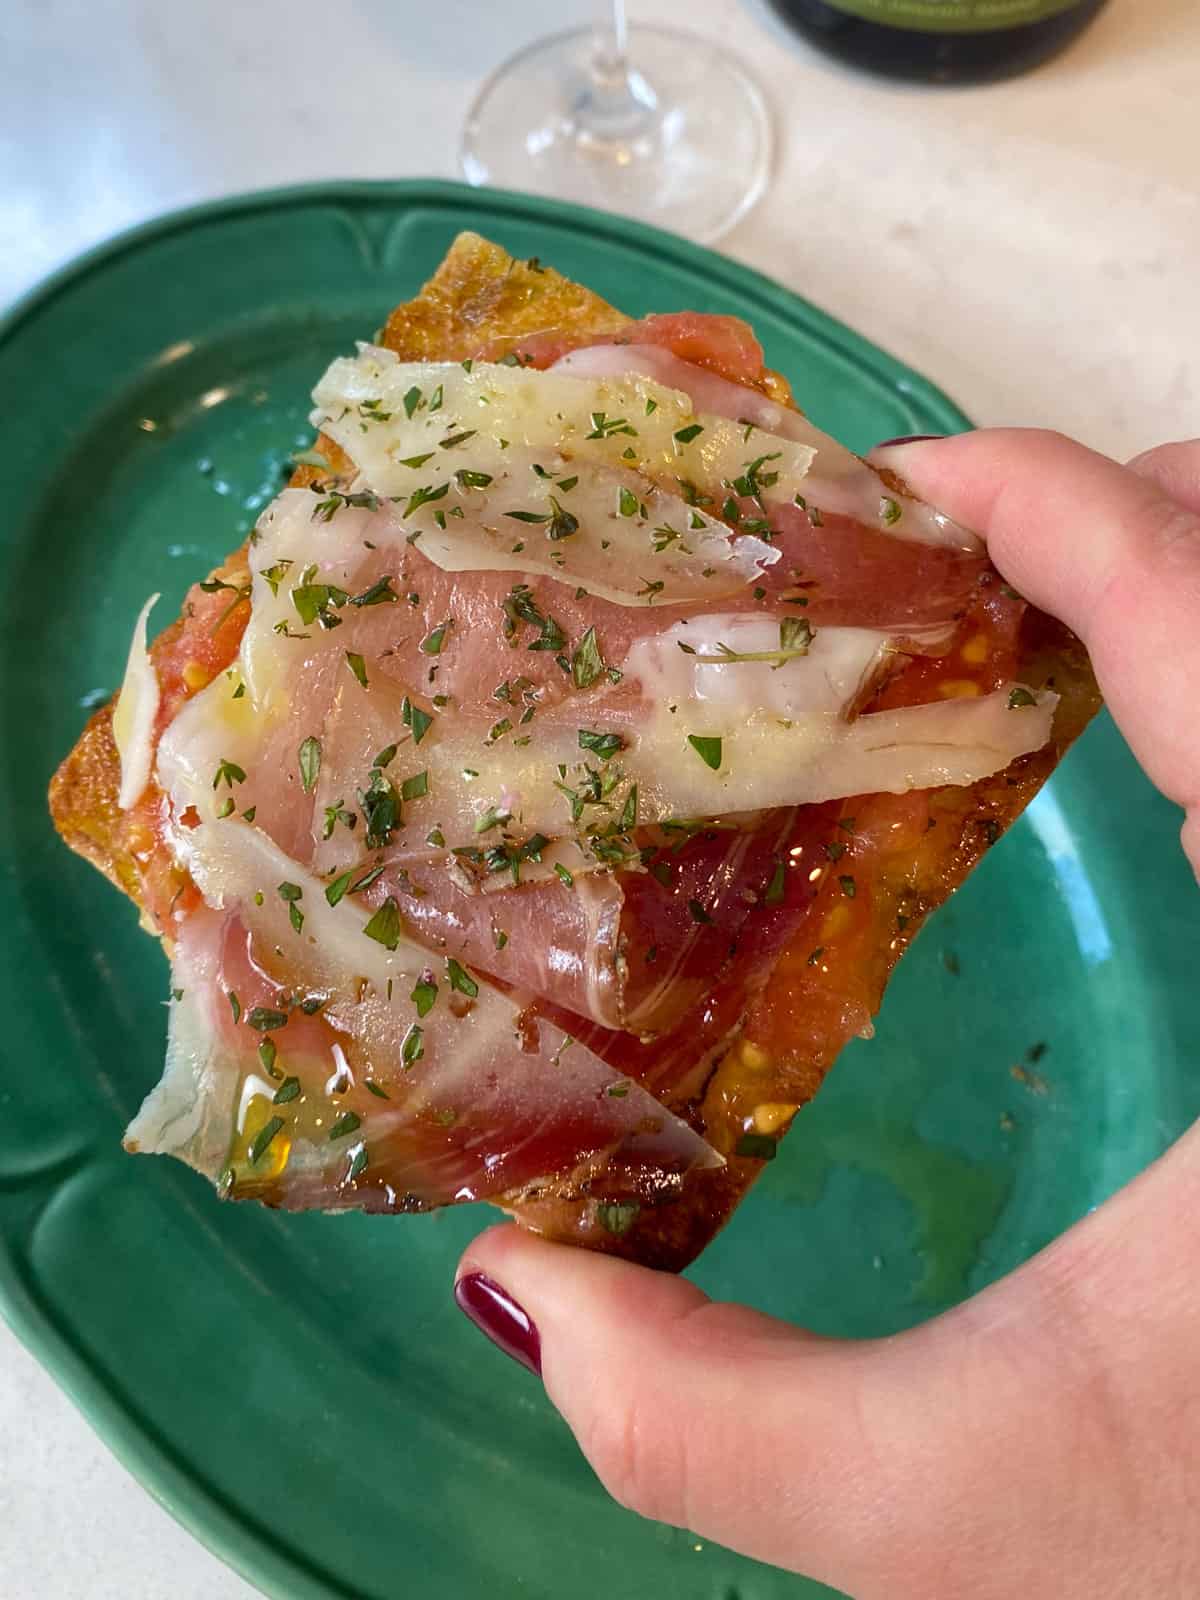 Layer a slice of manchego and jamón onto the tomato bread.